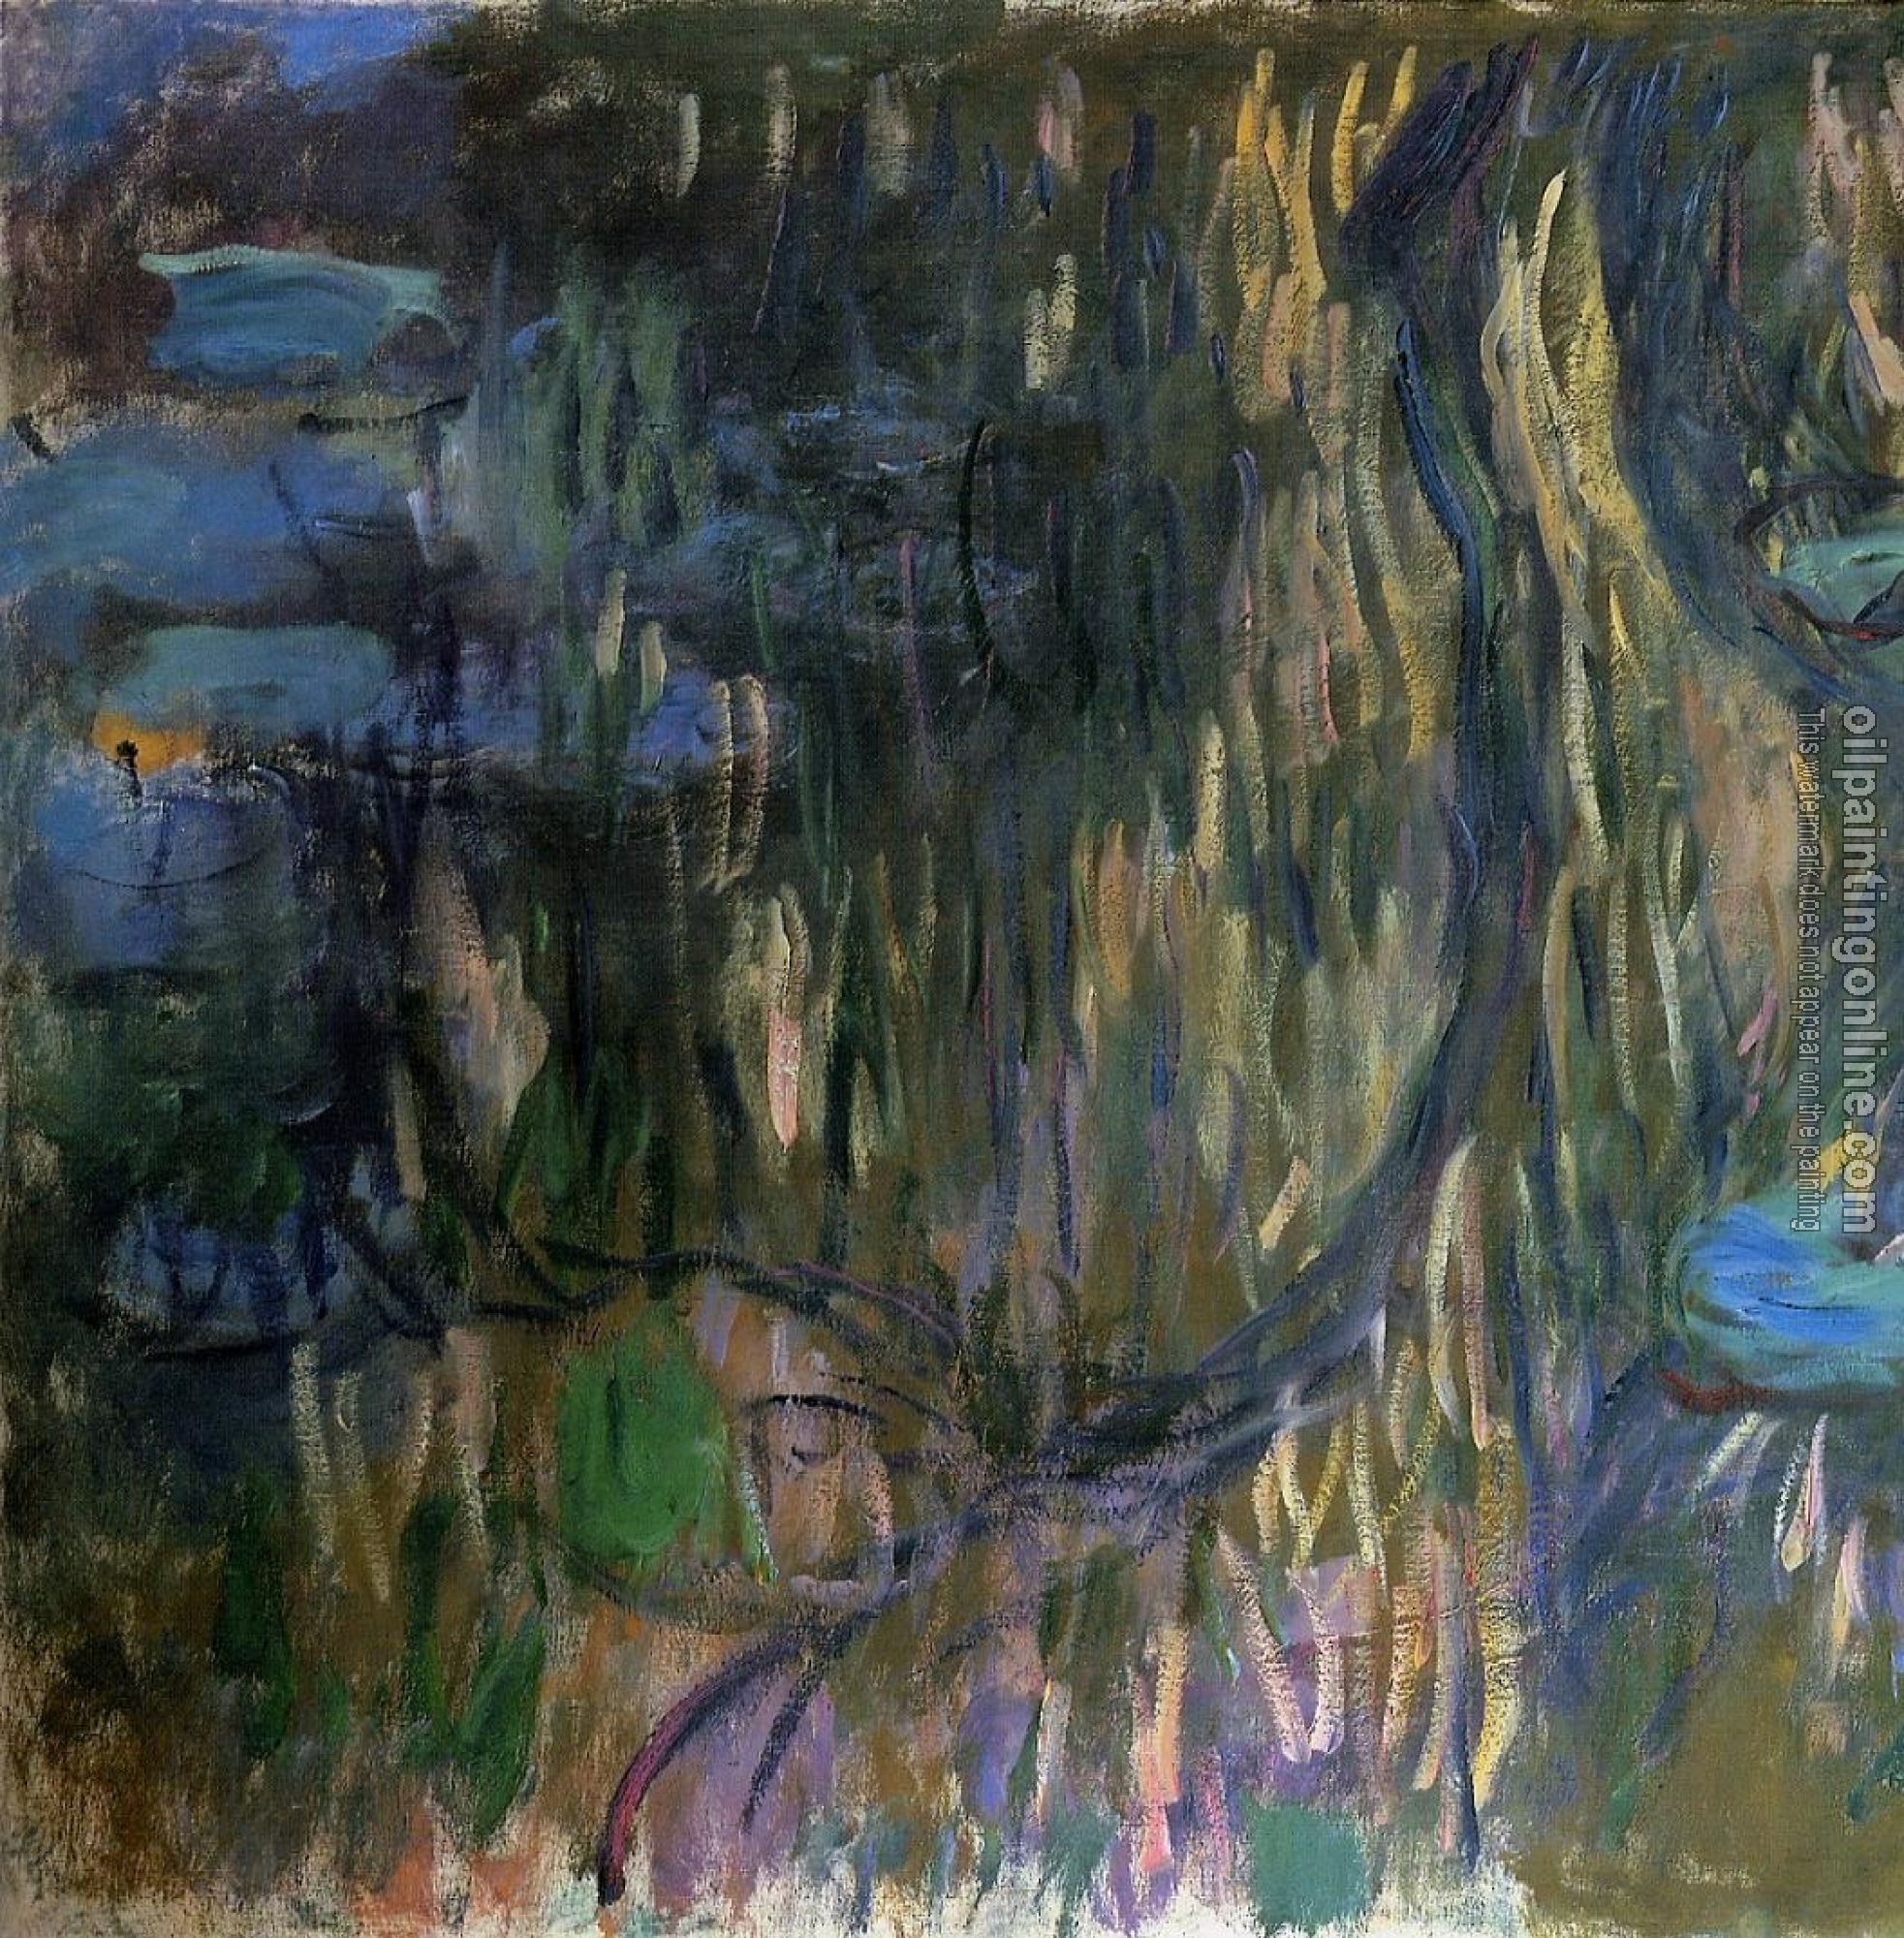 Monet, Claude Oscar - Water-Lilies, Reflections of Weeping Willows, left half